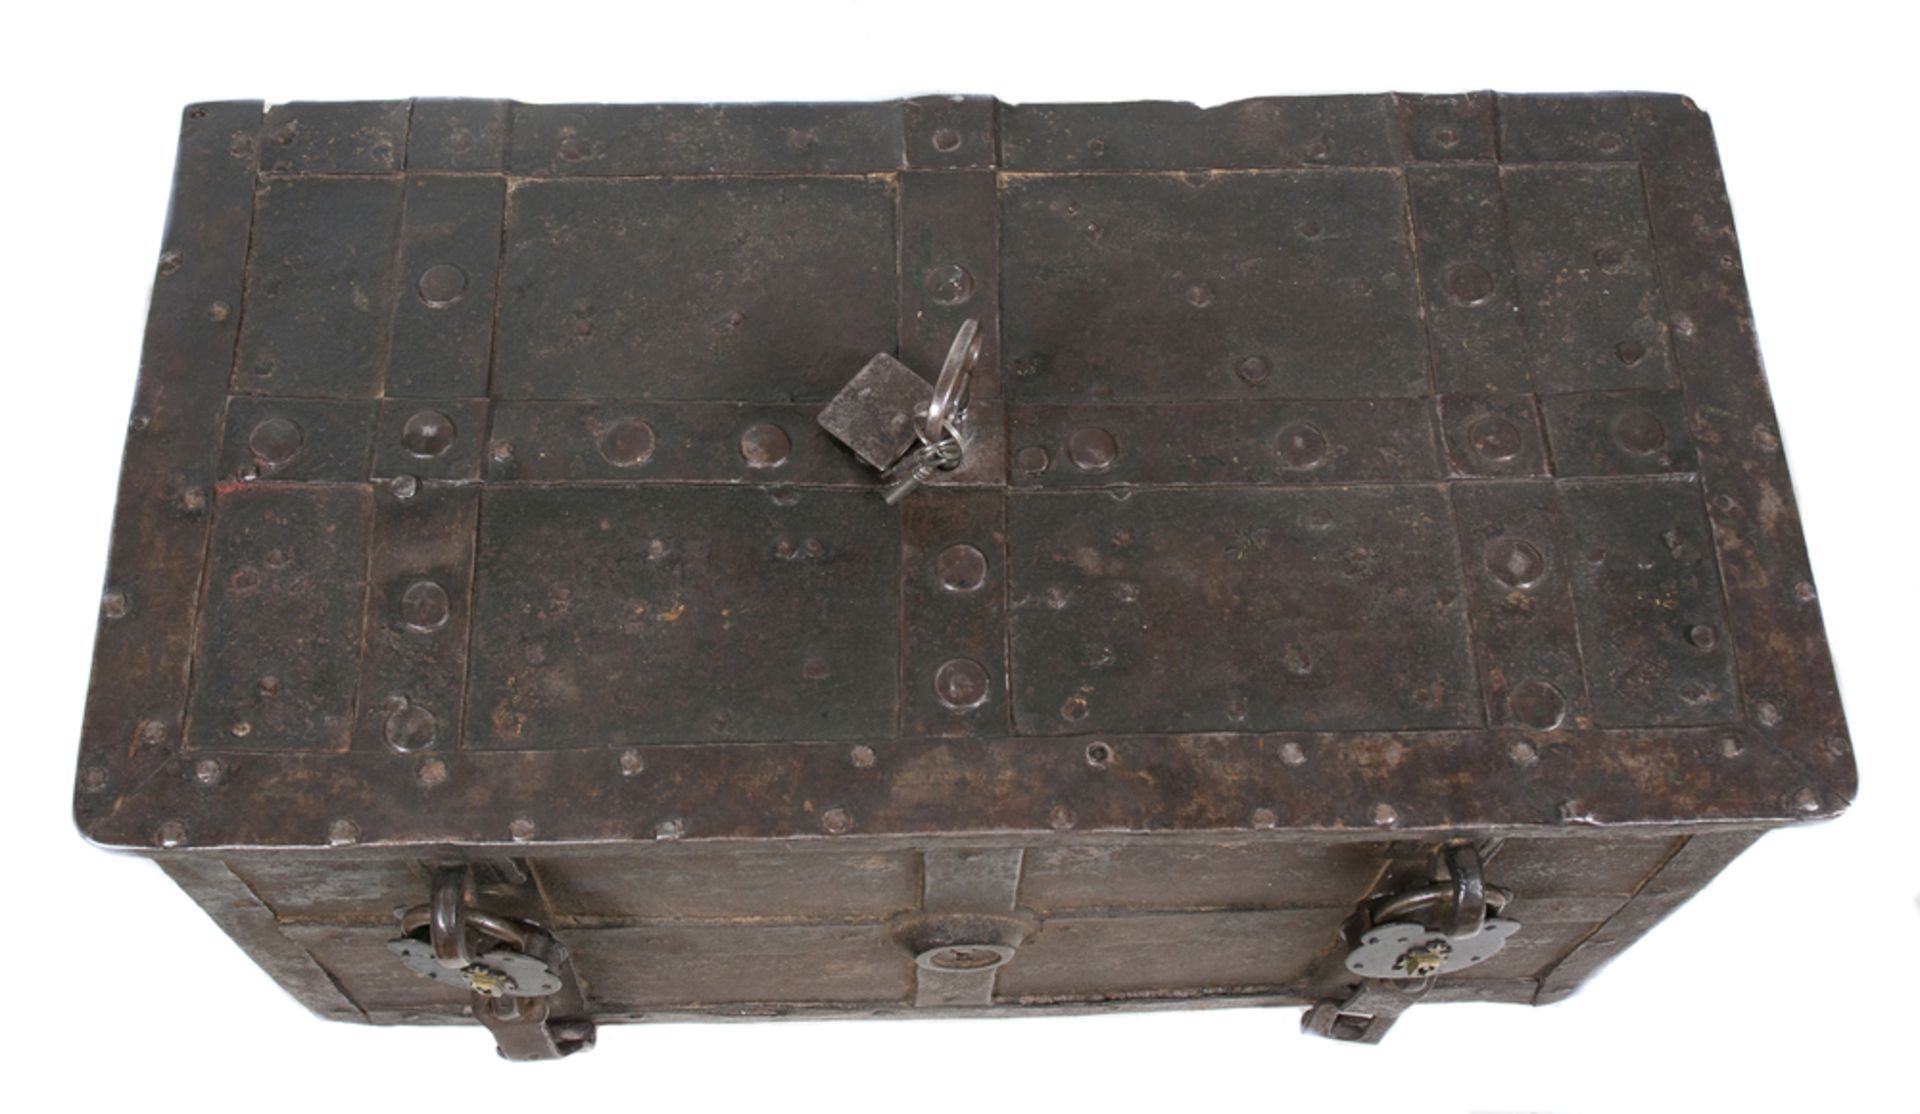 Wrought iron strong box. Nuremberg or Augsburg. Late 16th century. - Image 6 of 6